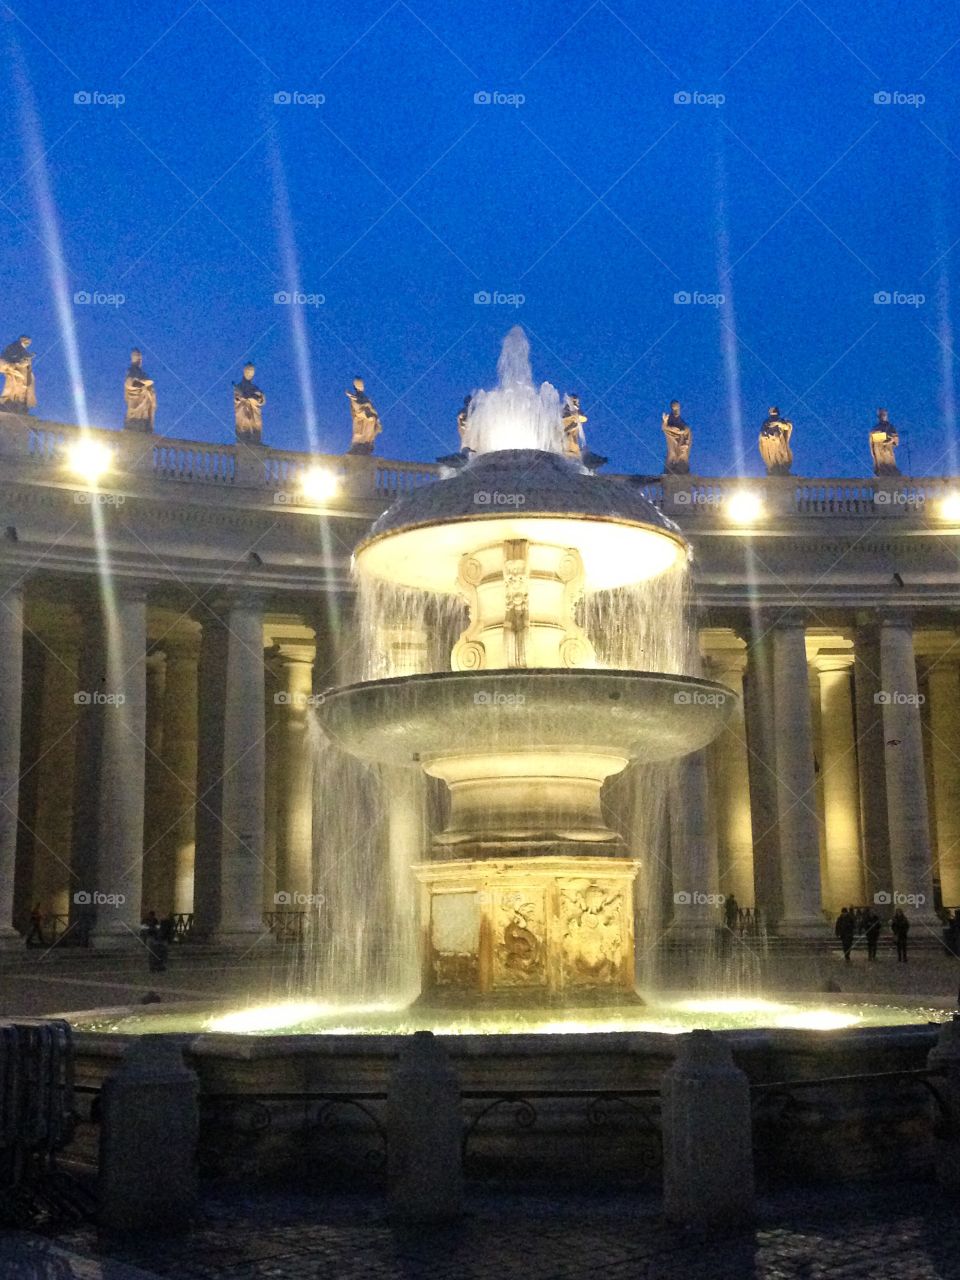 Vatican. The Bernini fountains in the evening. 